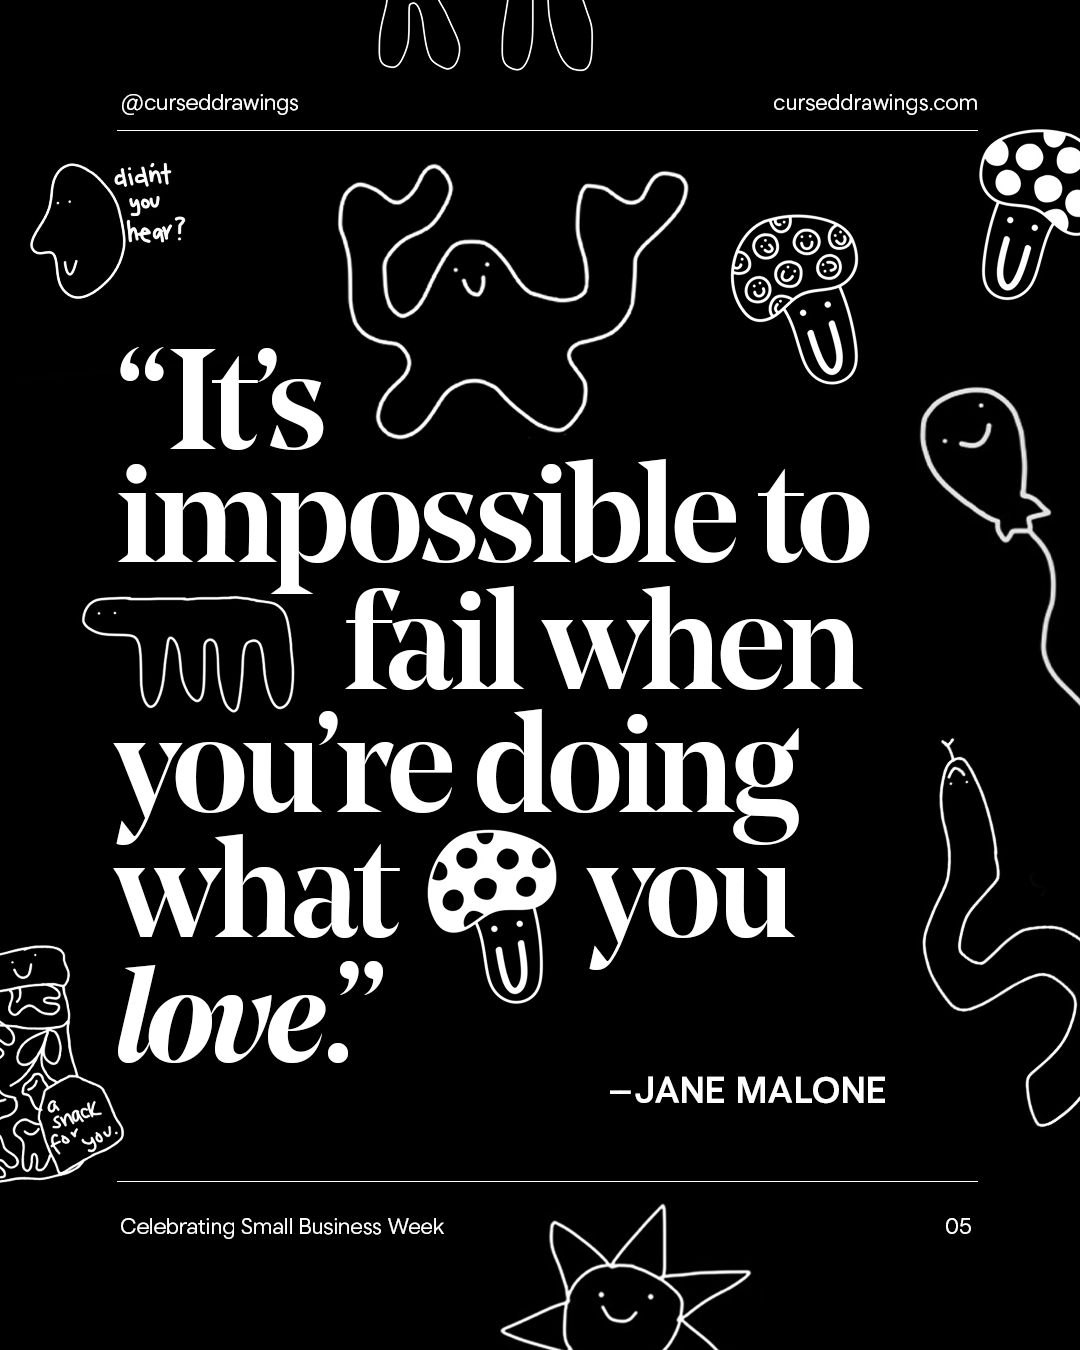 It's impossible to fail when you're doing what you love.